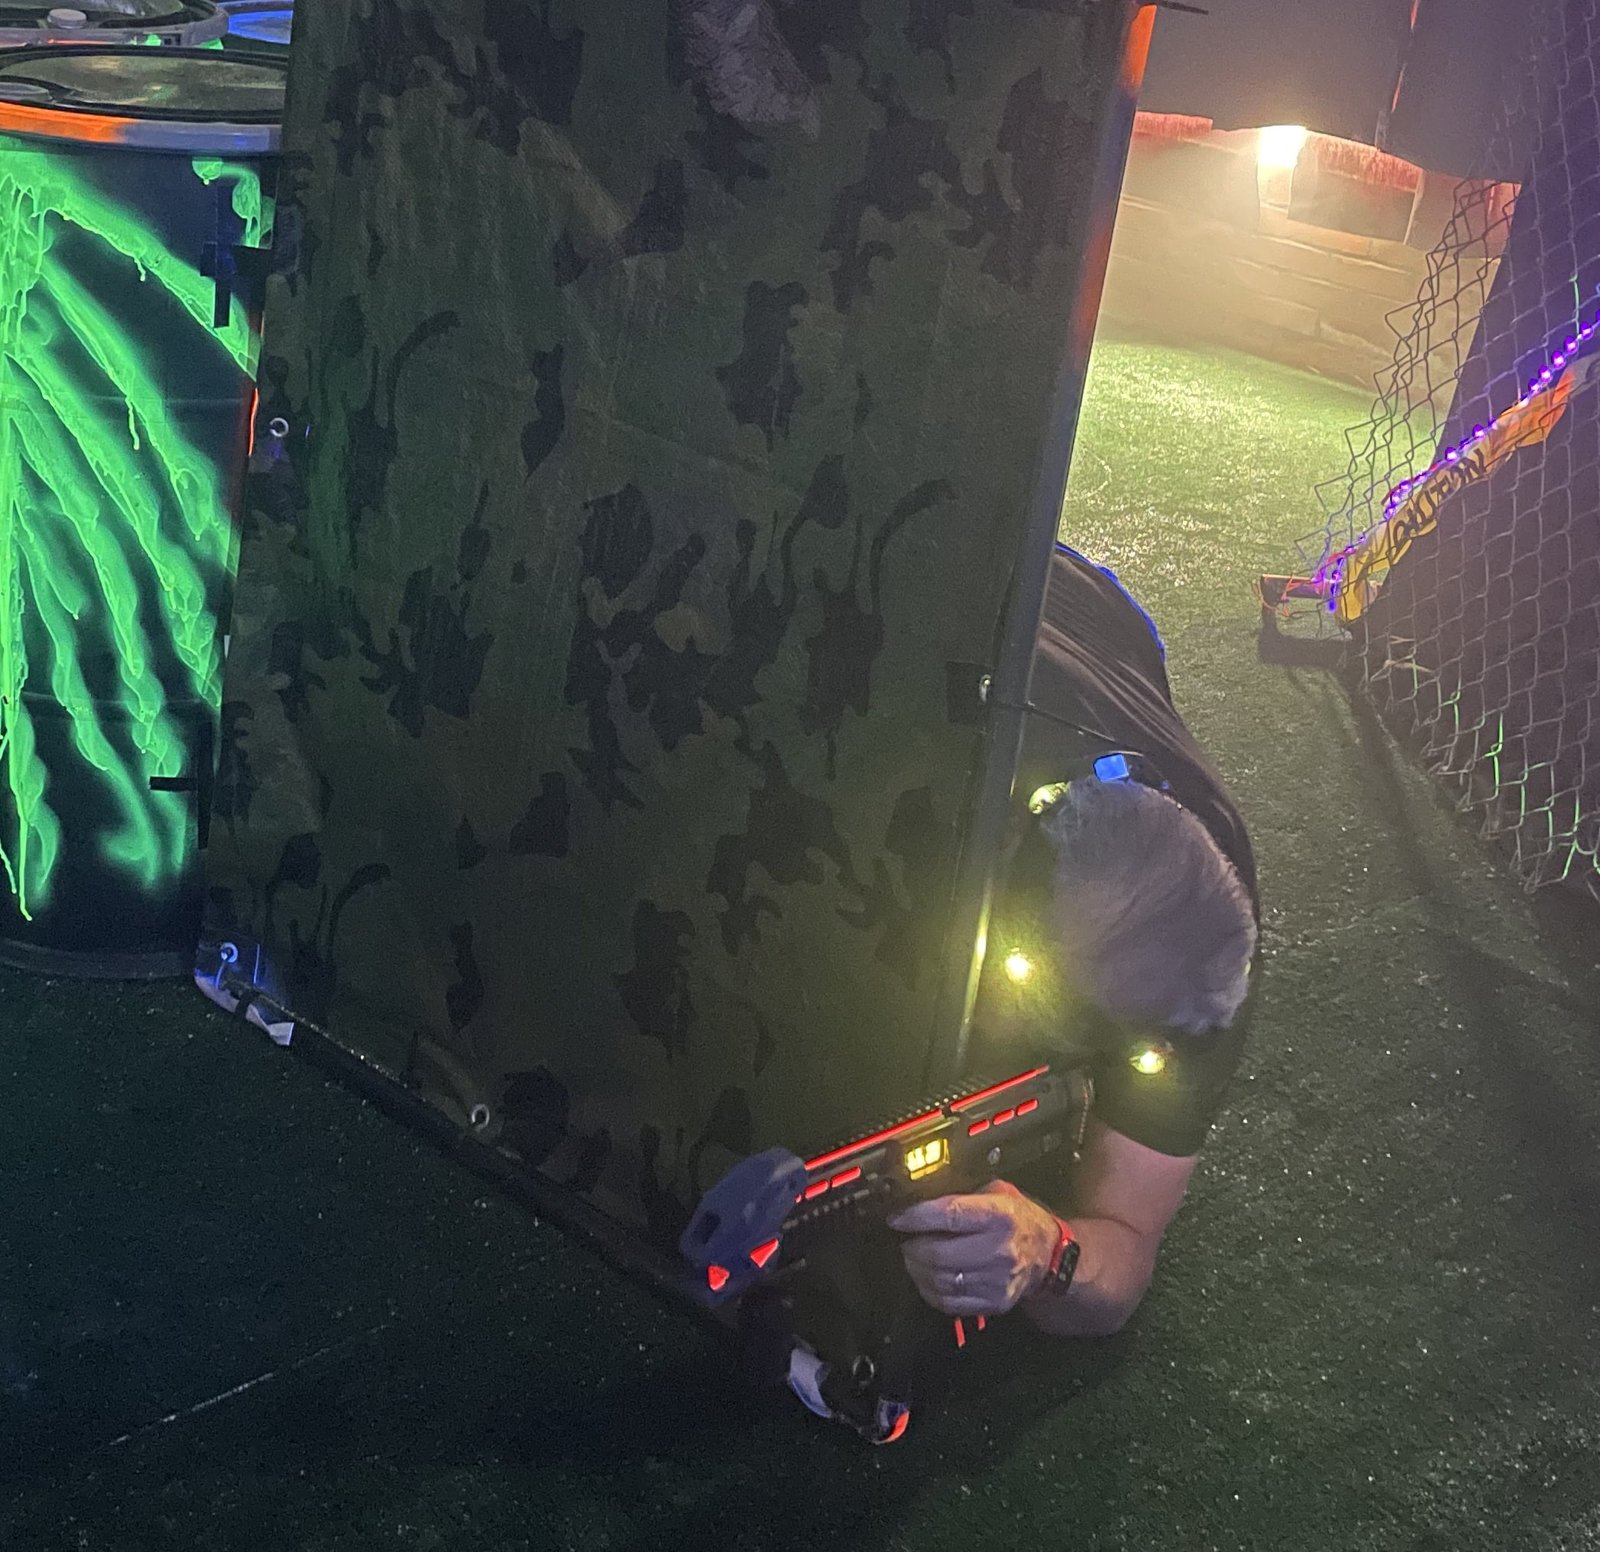 Laser Tag Gameplay at BMAZ the adventure zone in Black Mountain NC